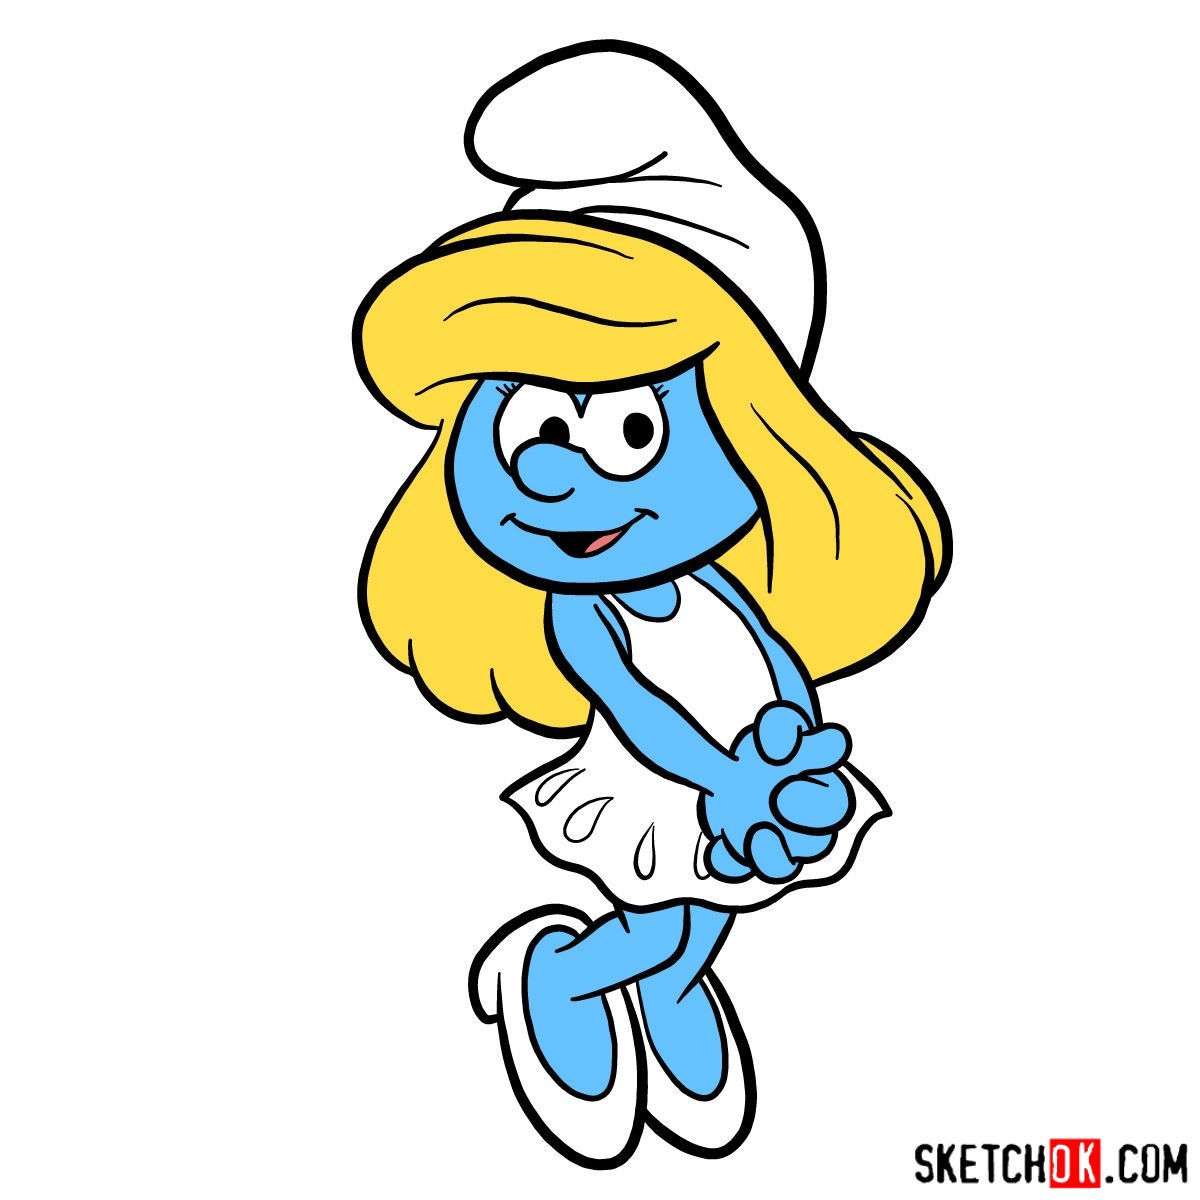 How to draw Smurfette